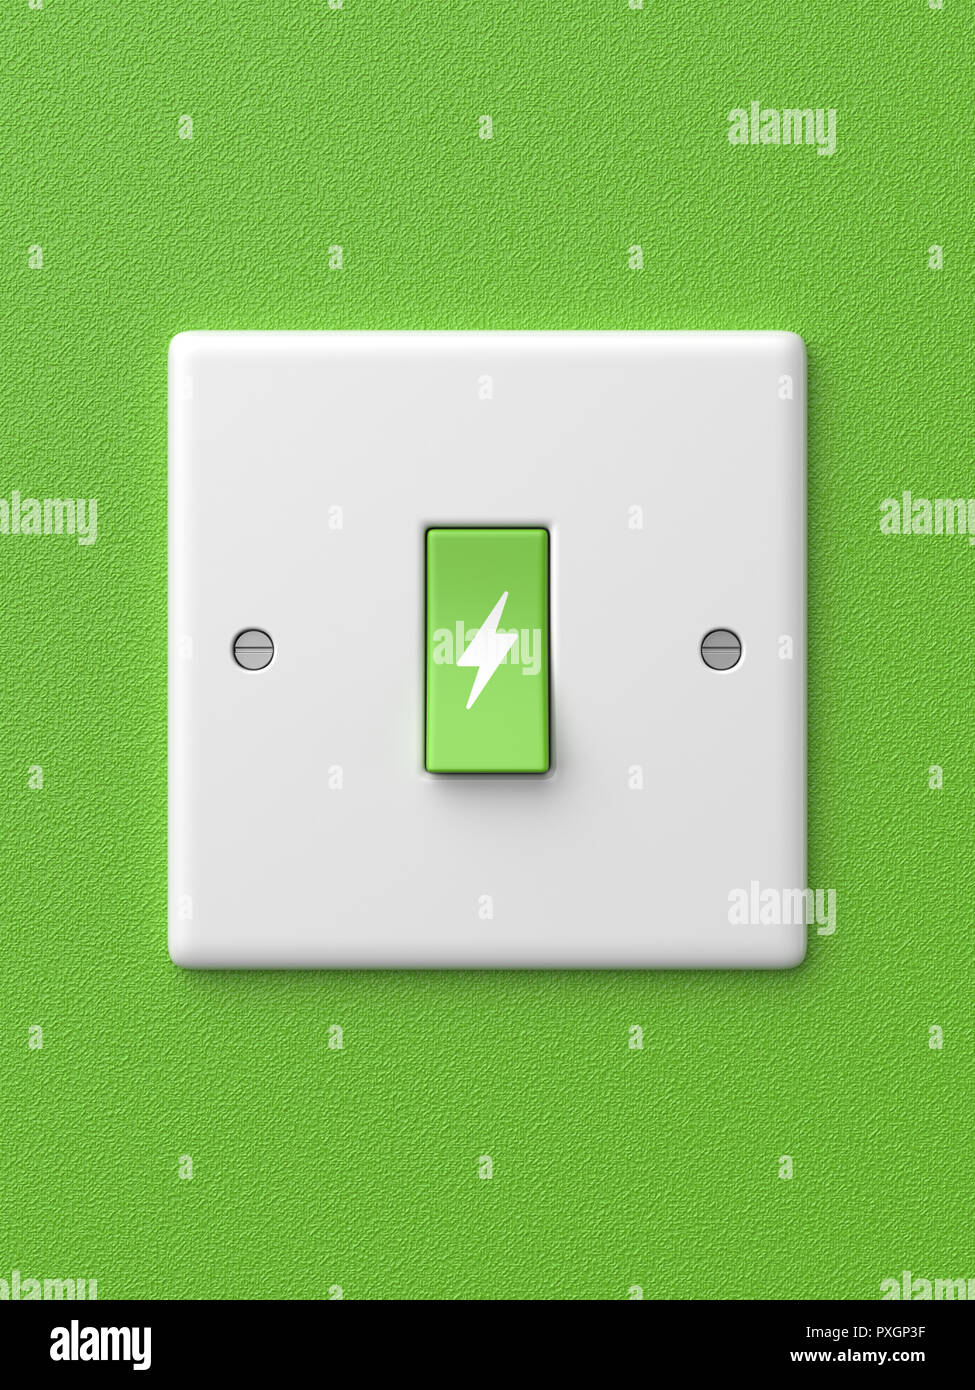 3d rendered front view of a single green light switch with a power symbol in the off position on a green background. Stock Photo